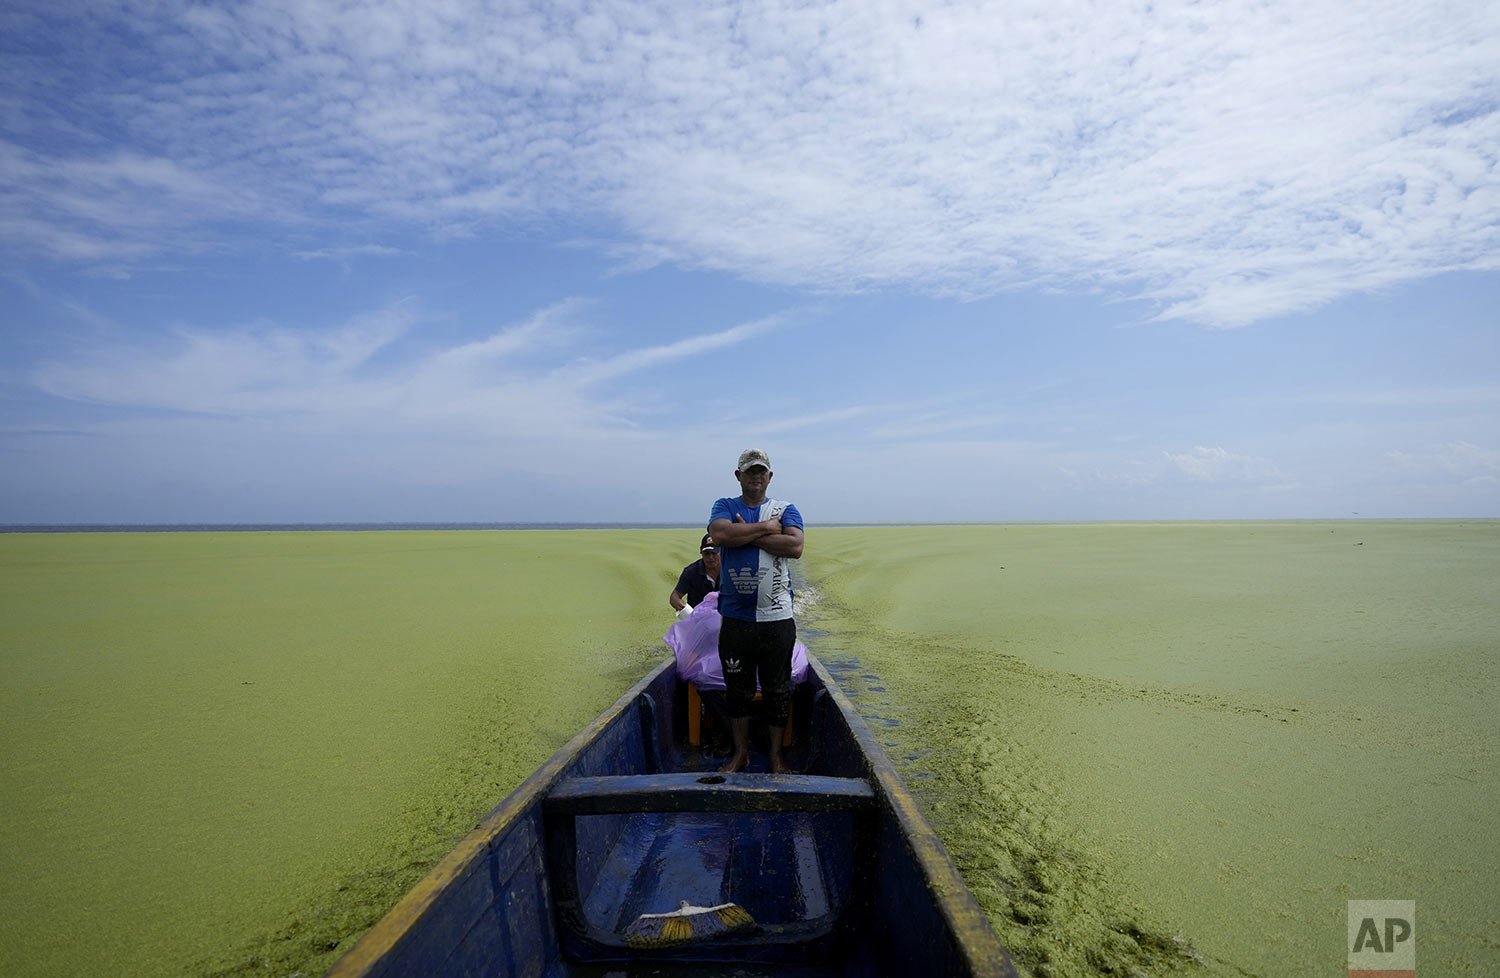  A fisherman stands on a boat in Cienaga Grande de Santa Marta marsh in Nueva Venecia, Colombia, Oct. 12, 2021. About 400 families live in stilt houses in the Cienaga Grande, the largest of the swampy marshes located in Colombia between the Magdalena